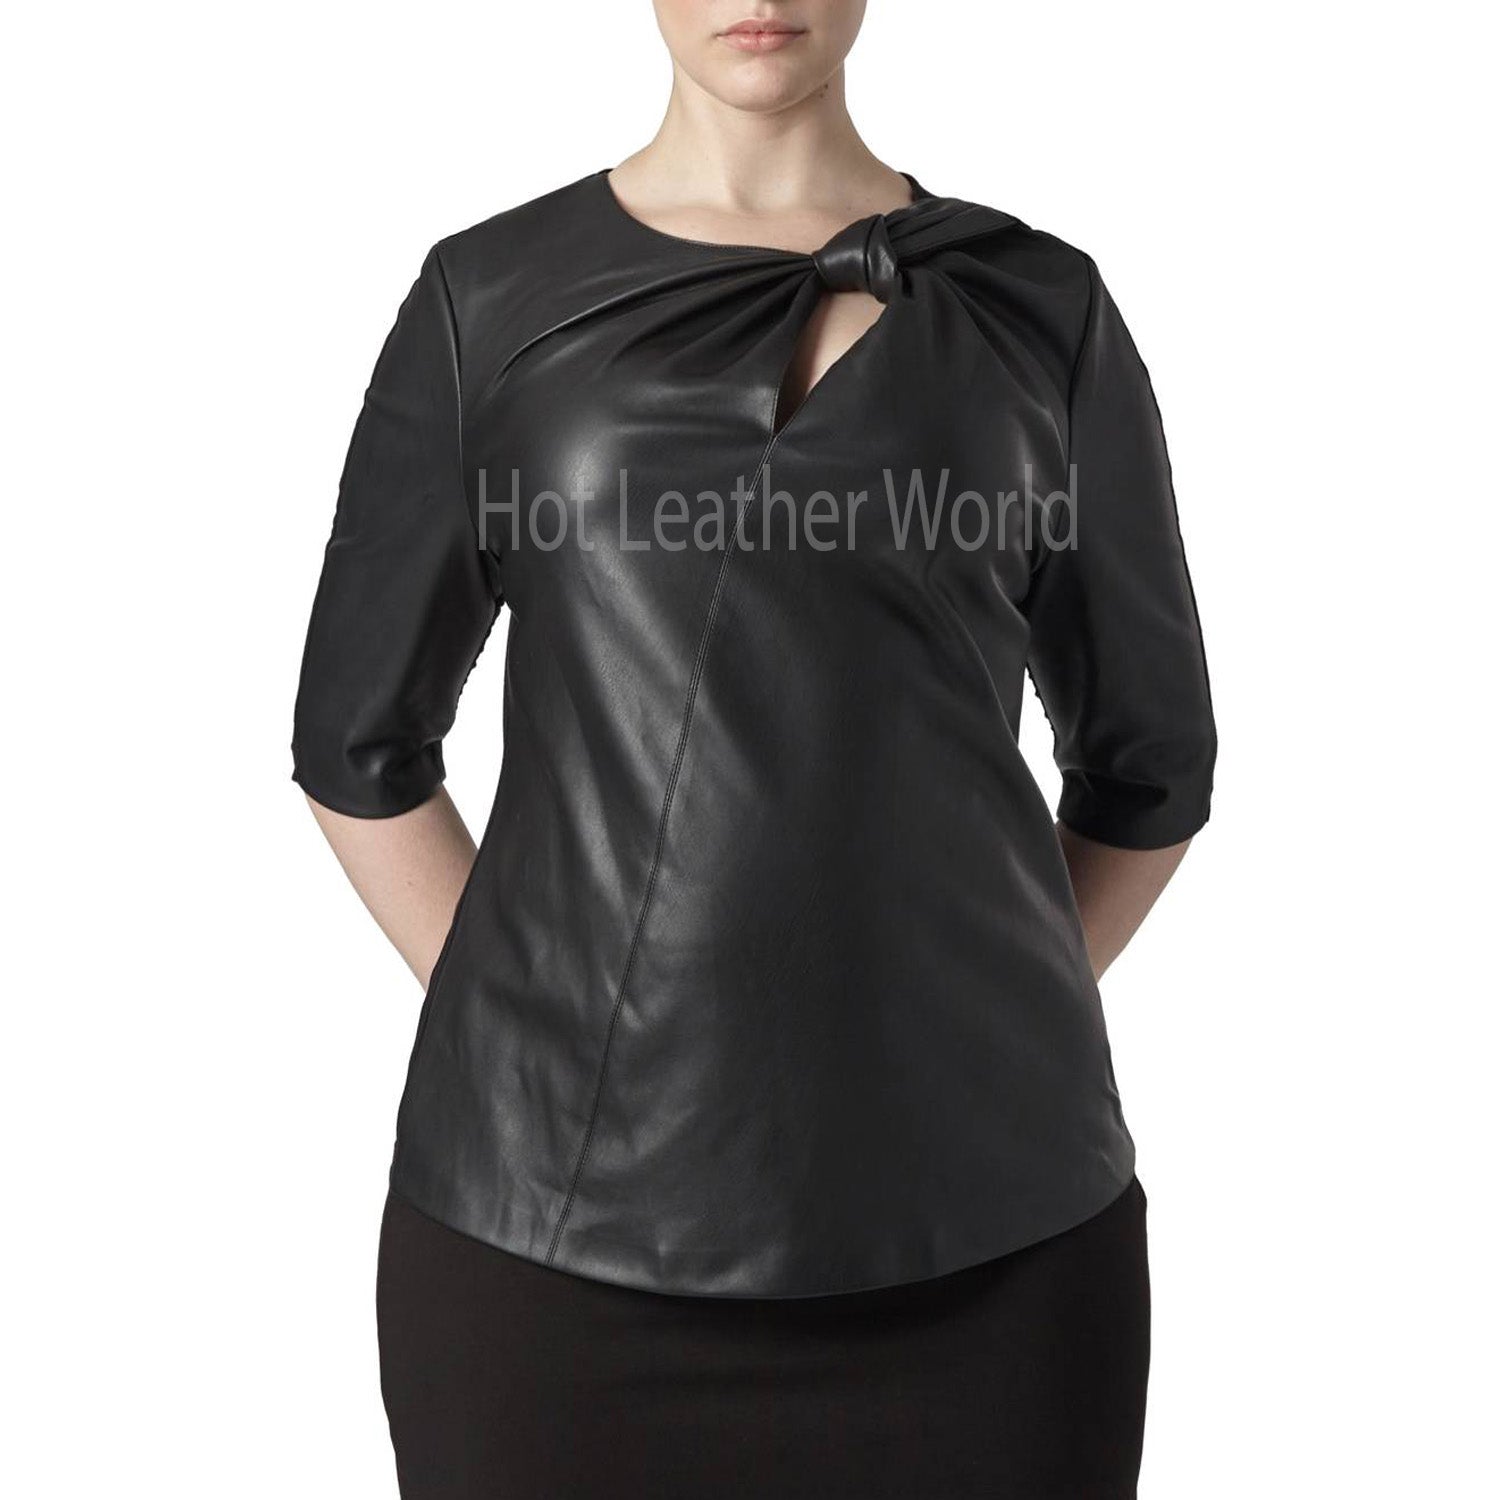 Plus Size Faux Leather Front Top -  HOTLEATHERWORLD